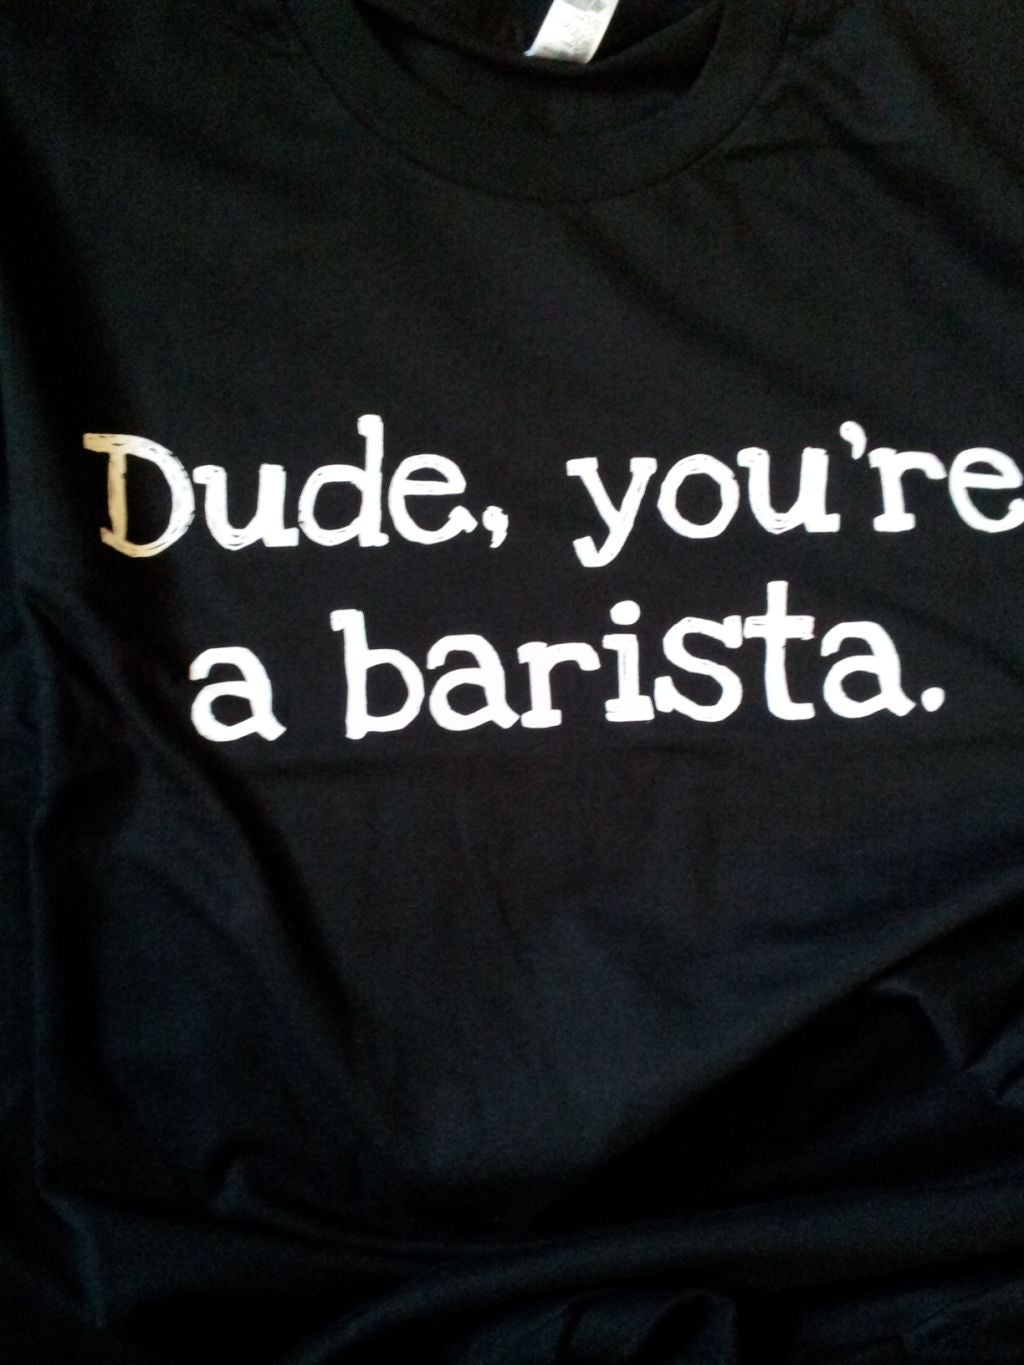 Win this t-shirt from Samsung - Samsung giving away phones and shirts in "Dude, you're a barista" contest